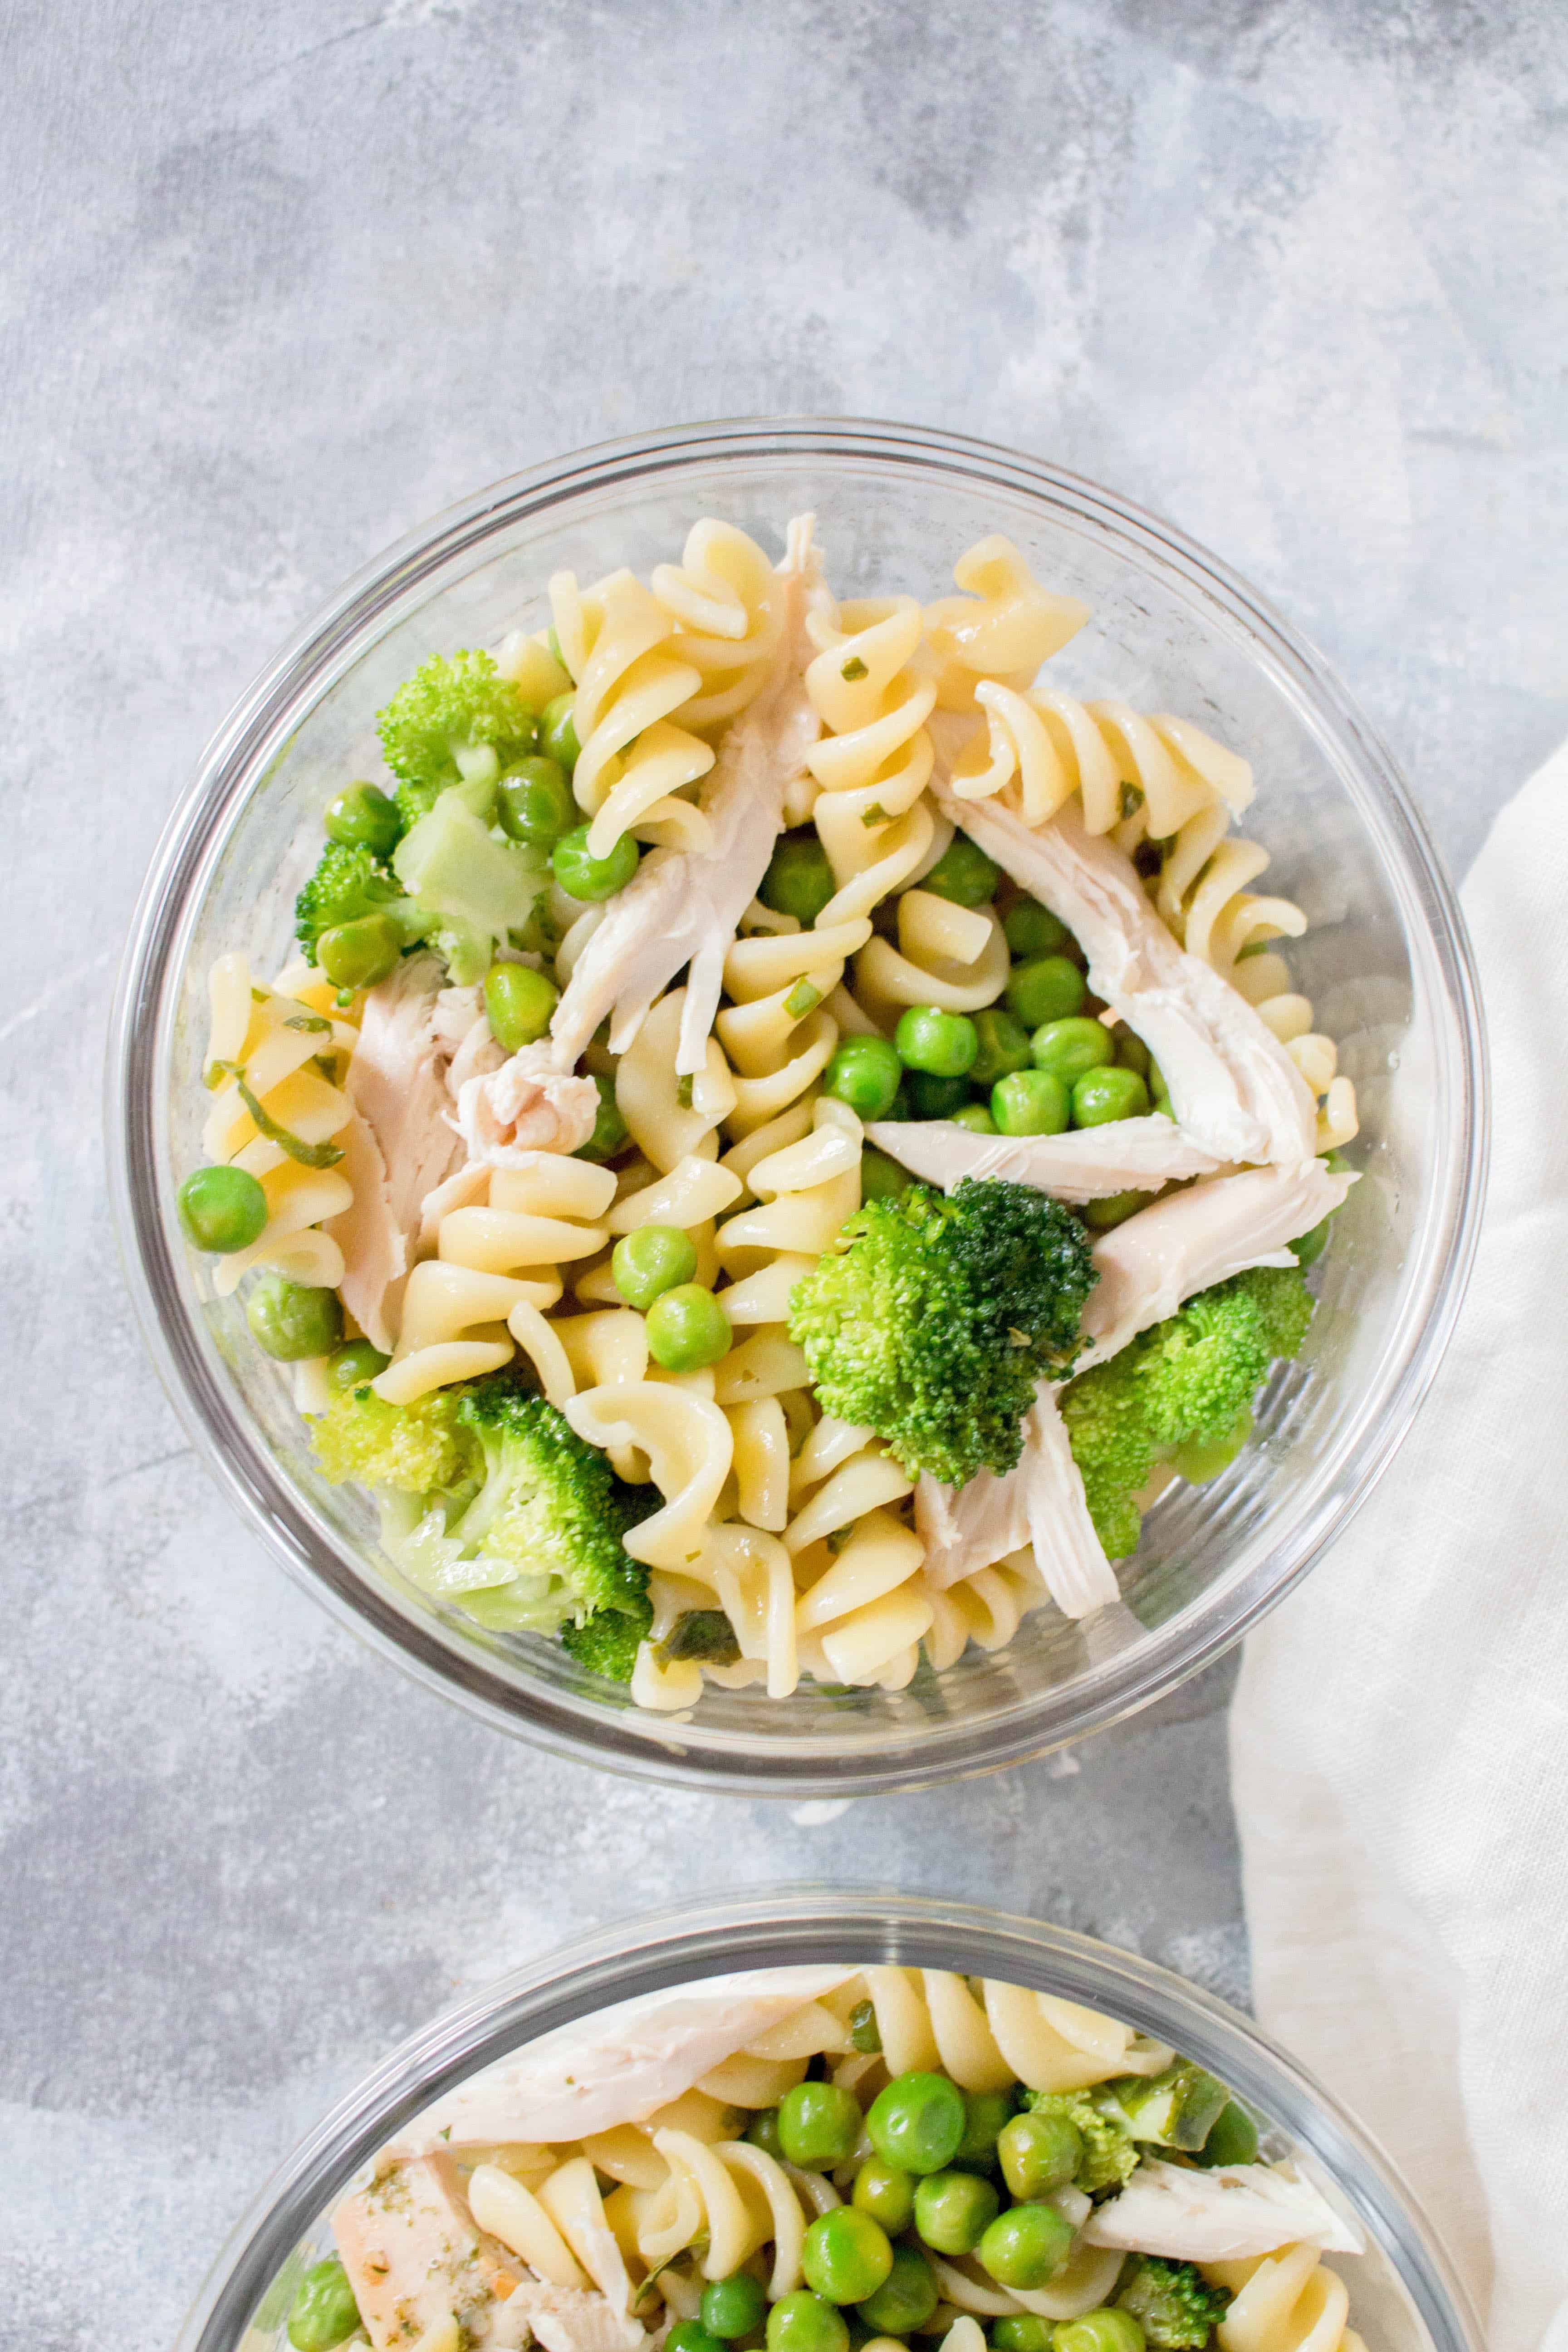 Looking for a cold lunch idea? Then this tasty Cold Chicken Pasta with Broccoli and Peas meal prep is for you!